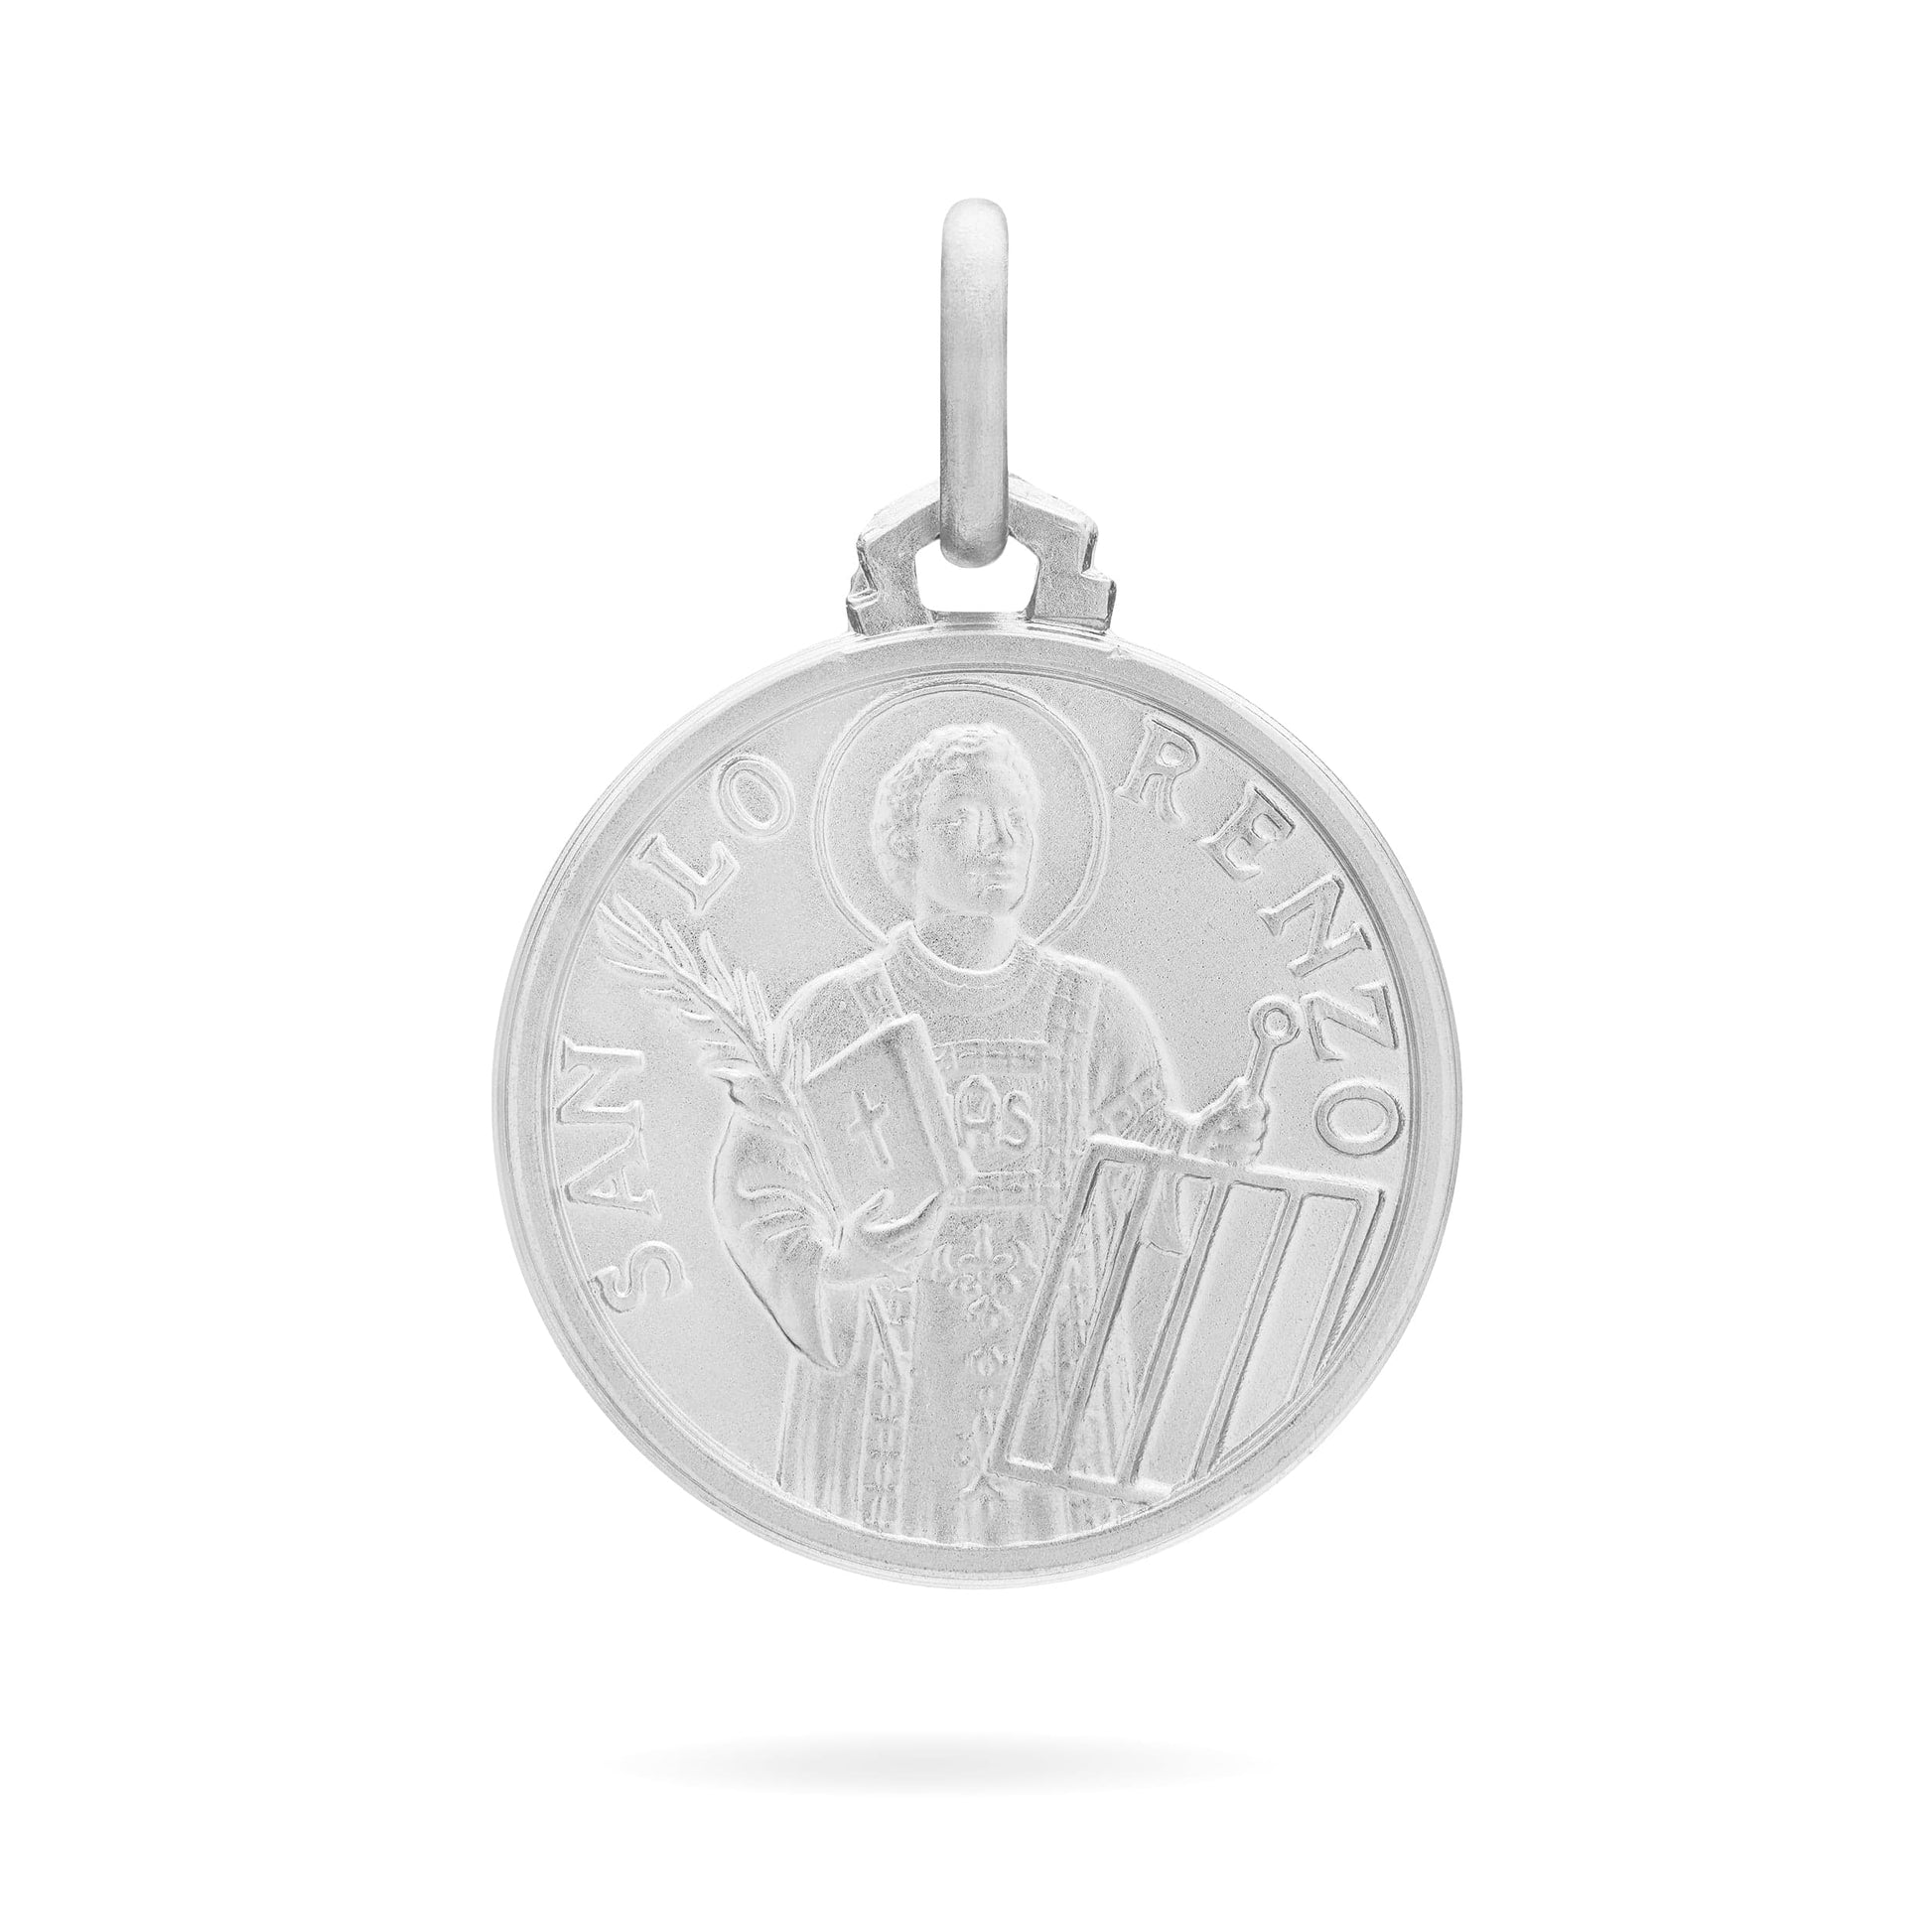 MONDO CATTOLICO Medal 18 mm (0.70 in) Silver medal of Saint Lawrence-18 mm